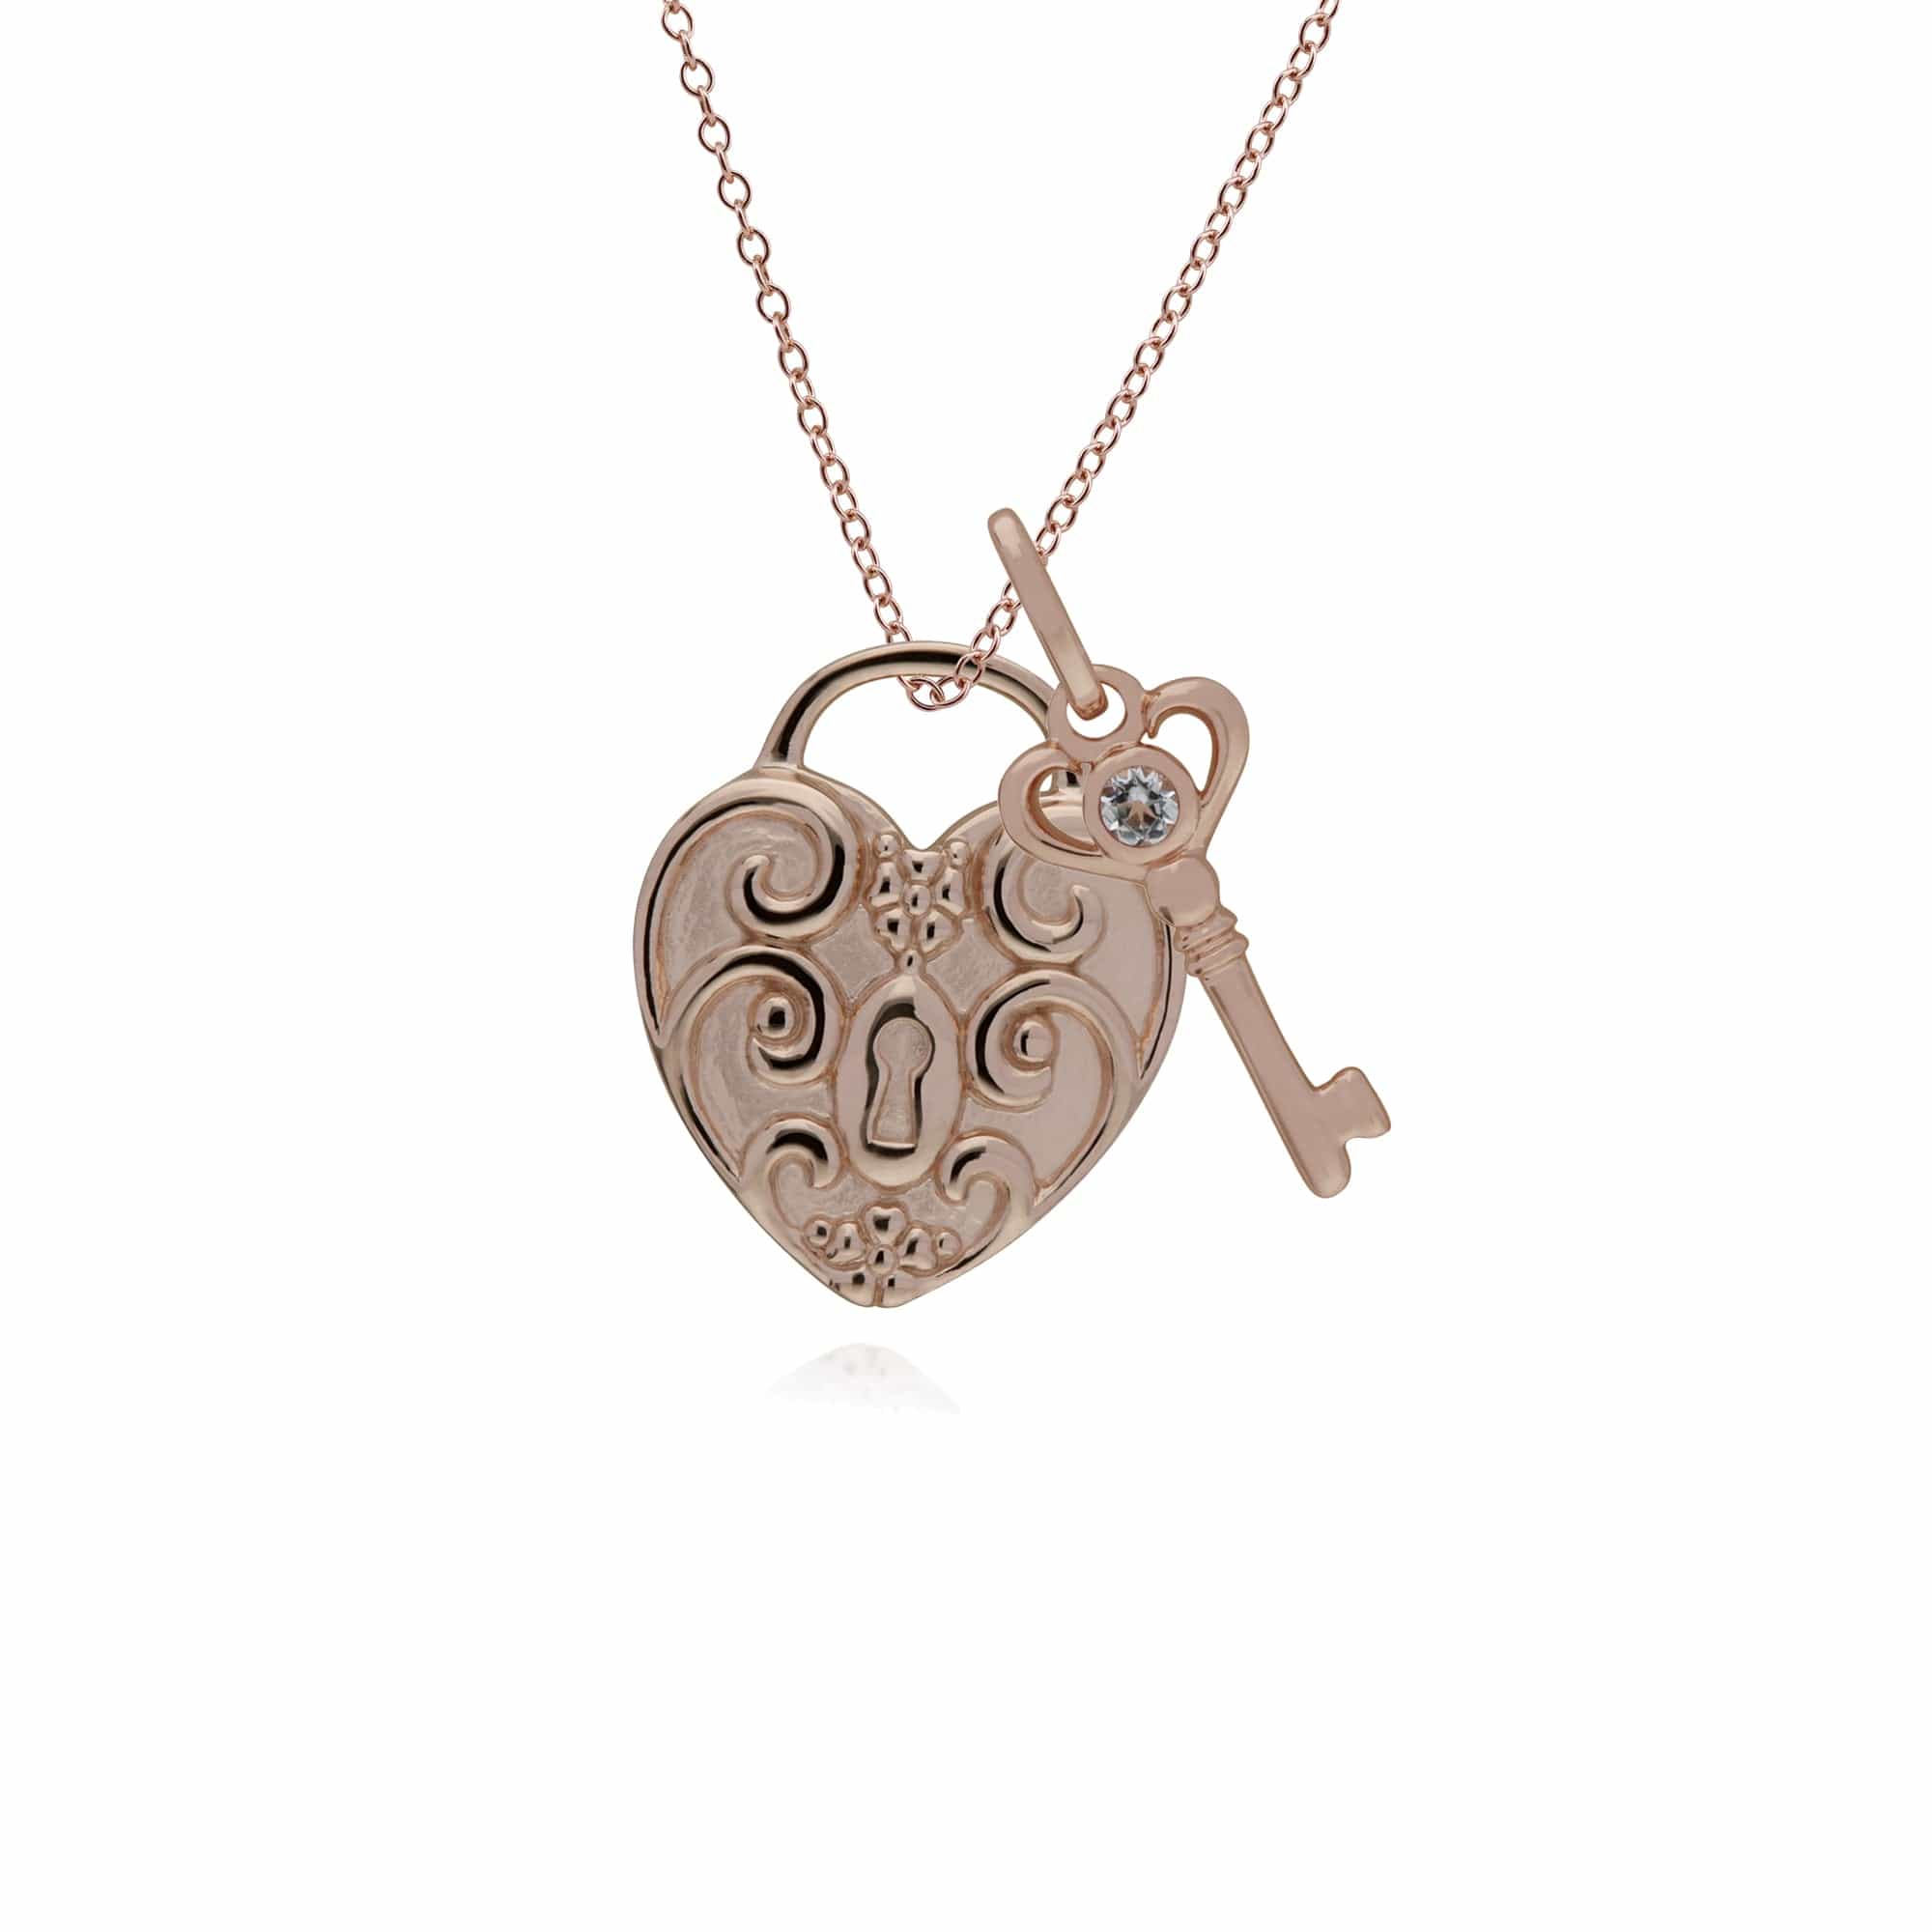 270P026310925-270P026501925 Classic Swirl Heart Lock Pendant & Clear Topaz Key Charm in Rose Gold Plated 925 Sterling Silver 1